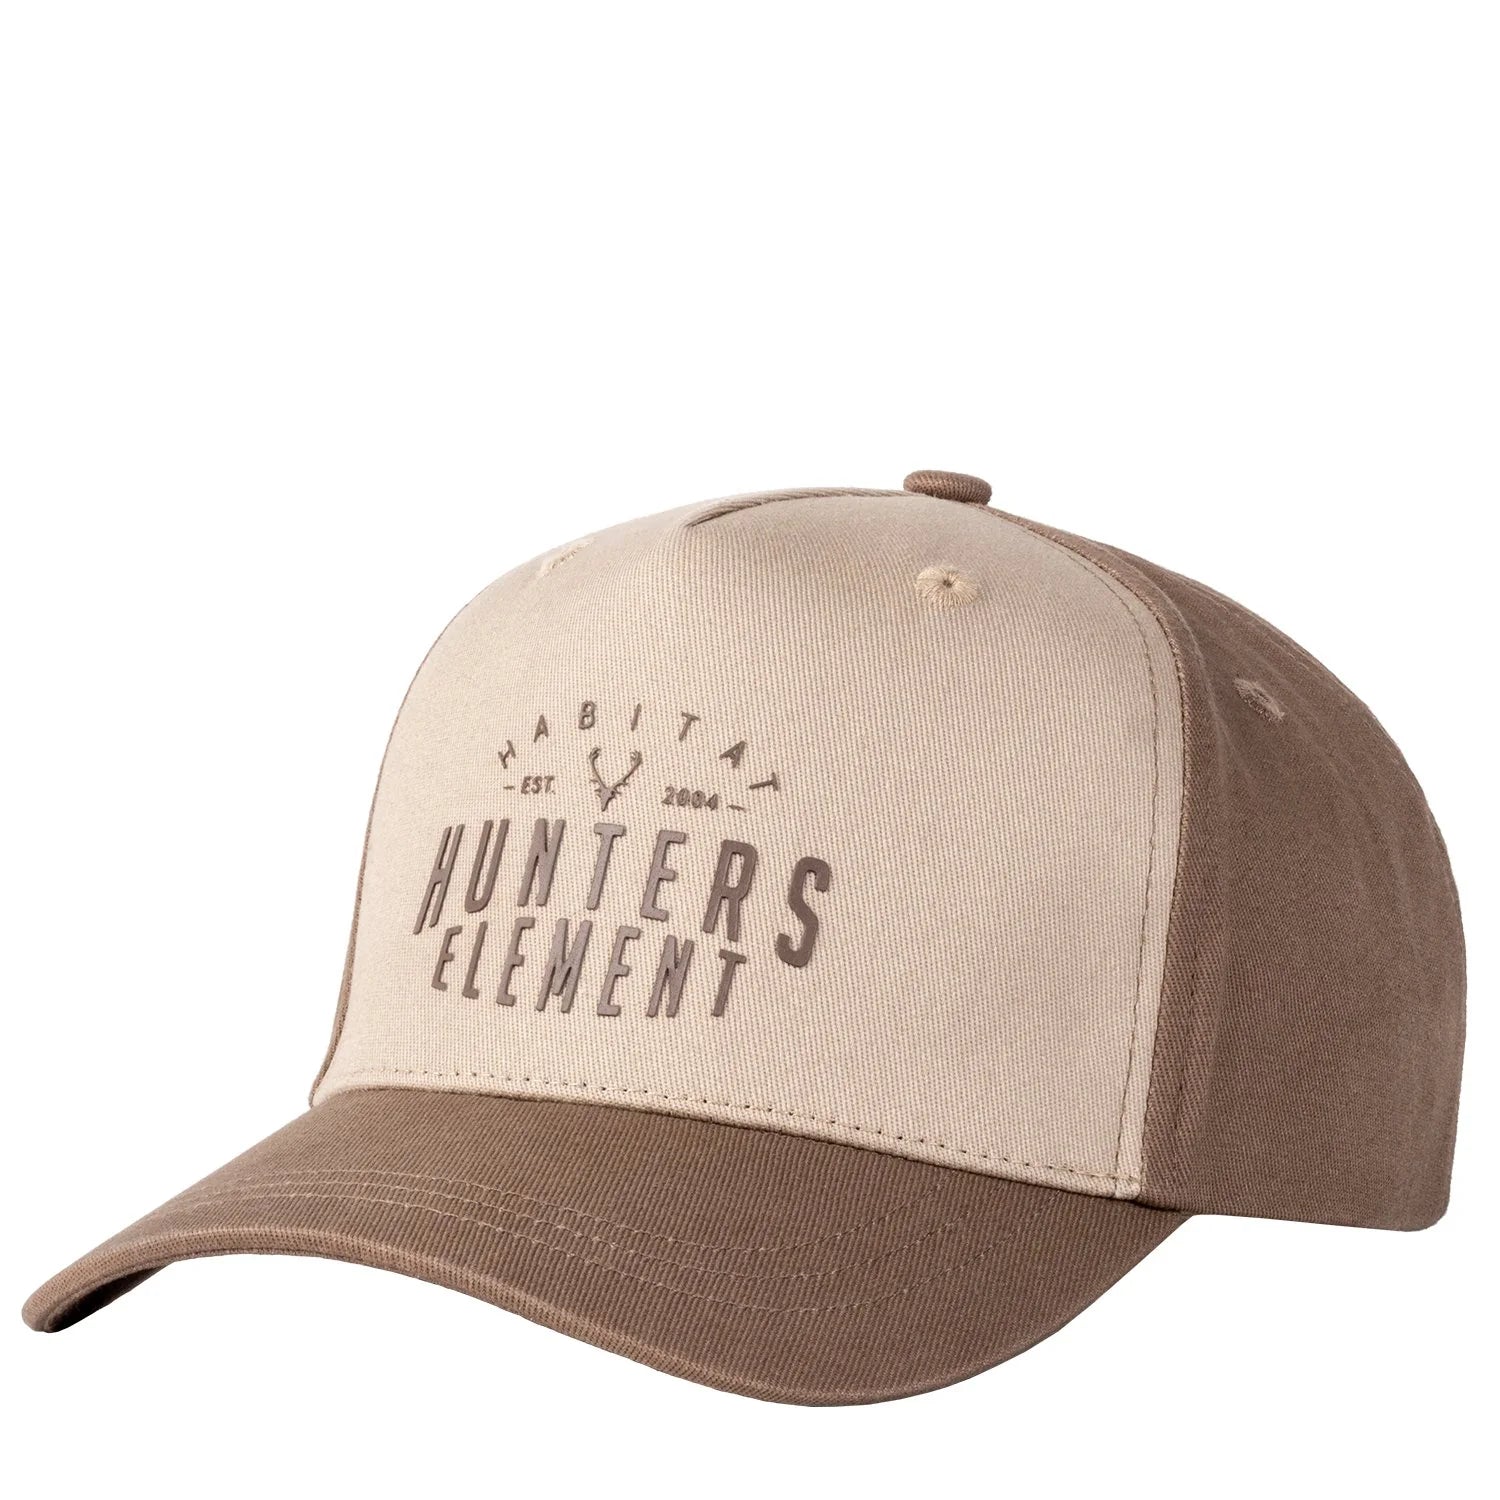 Hunters Element Wilson Cap - Brown/Light Brown -  - Mansfield Hunting & Fishing - Products to prepare for Corona Virus